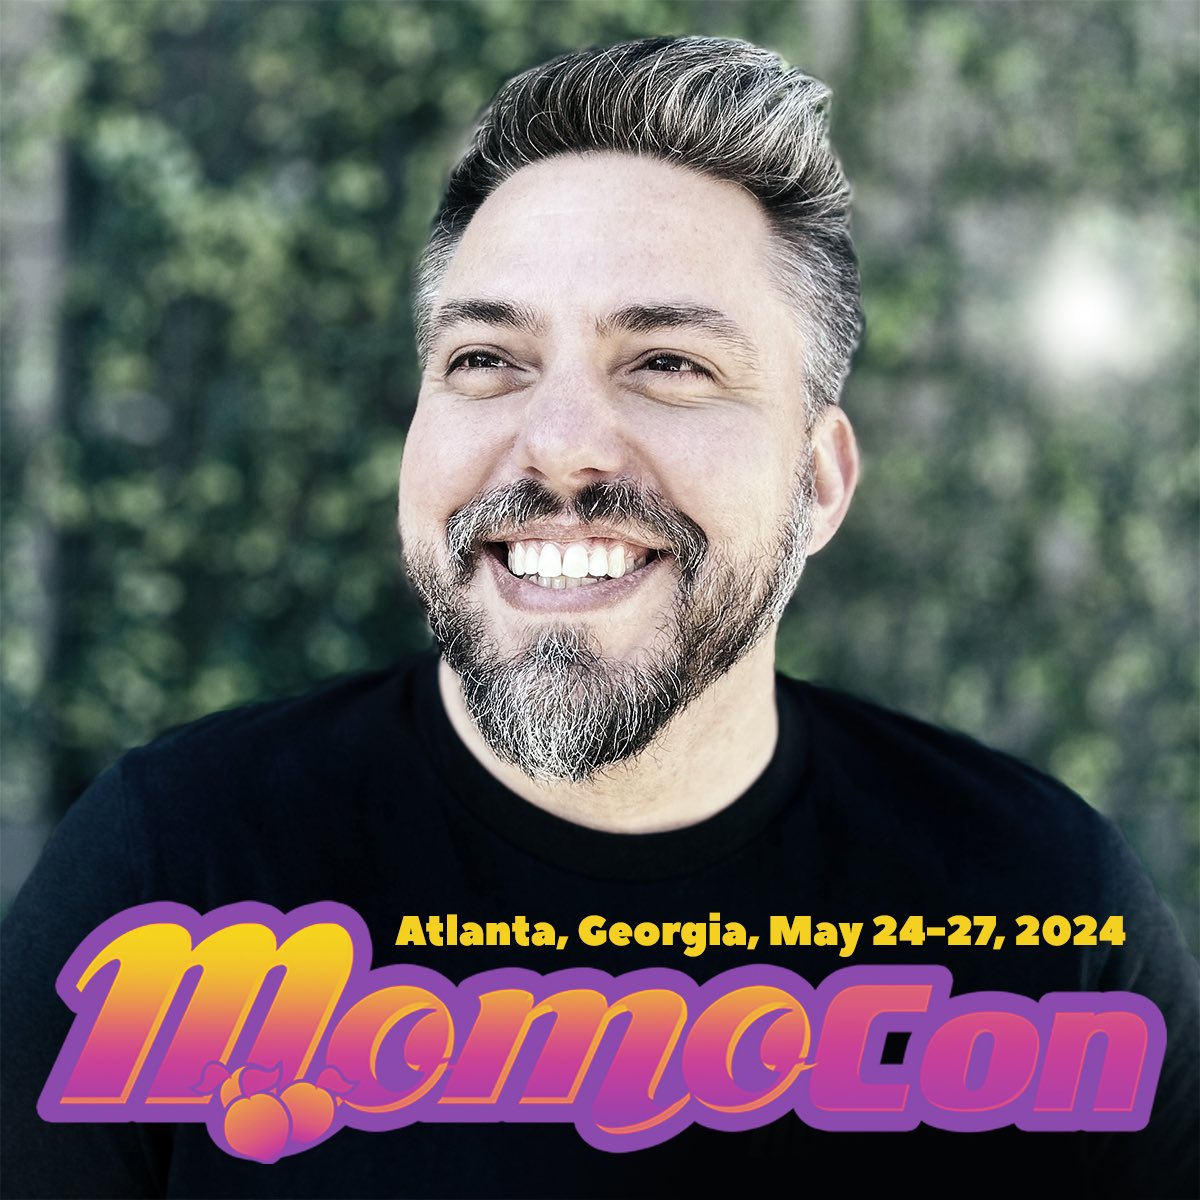 Excited to be heading back to Atlanta for MomoCon 2024! See you there this weekend! #momocon @MomoCon